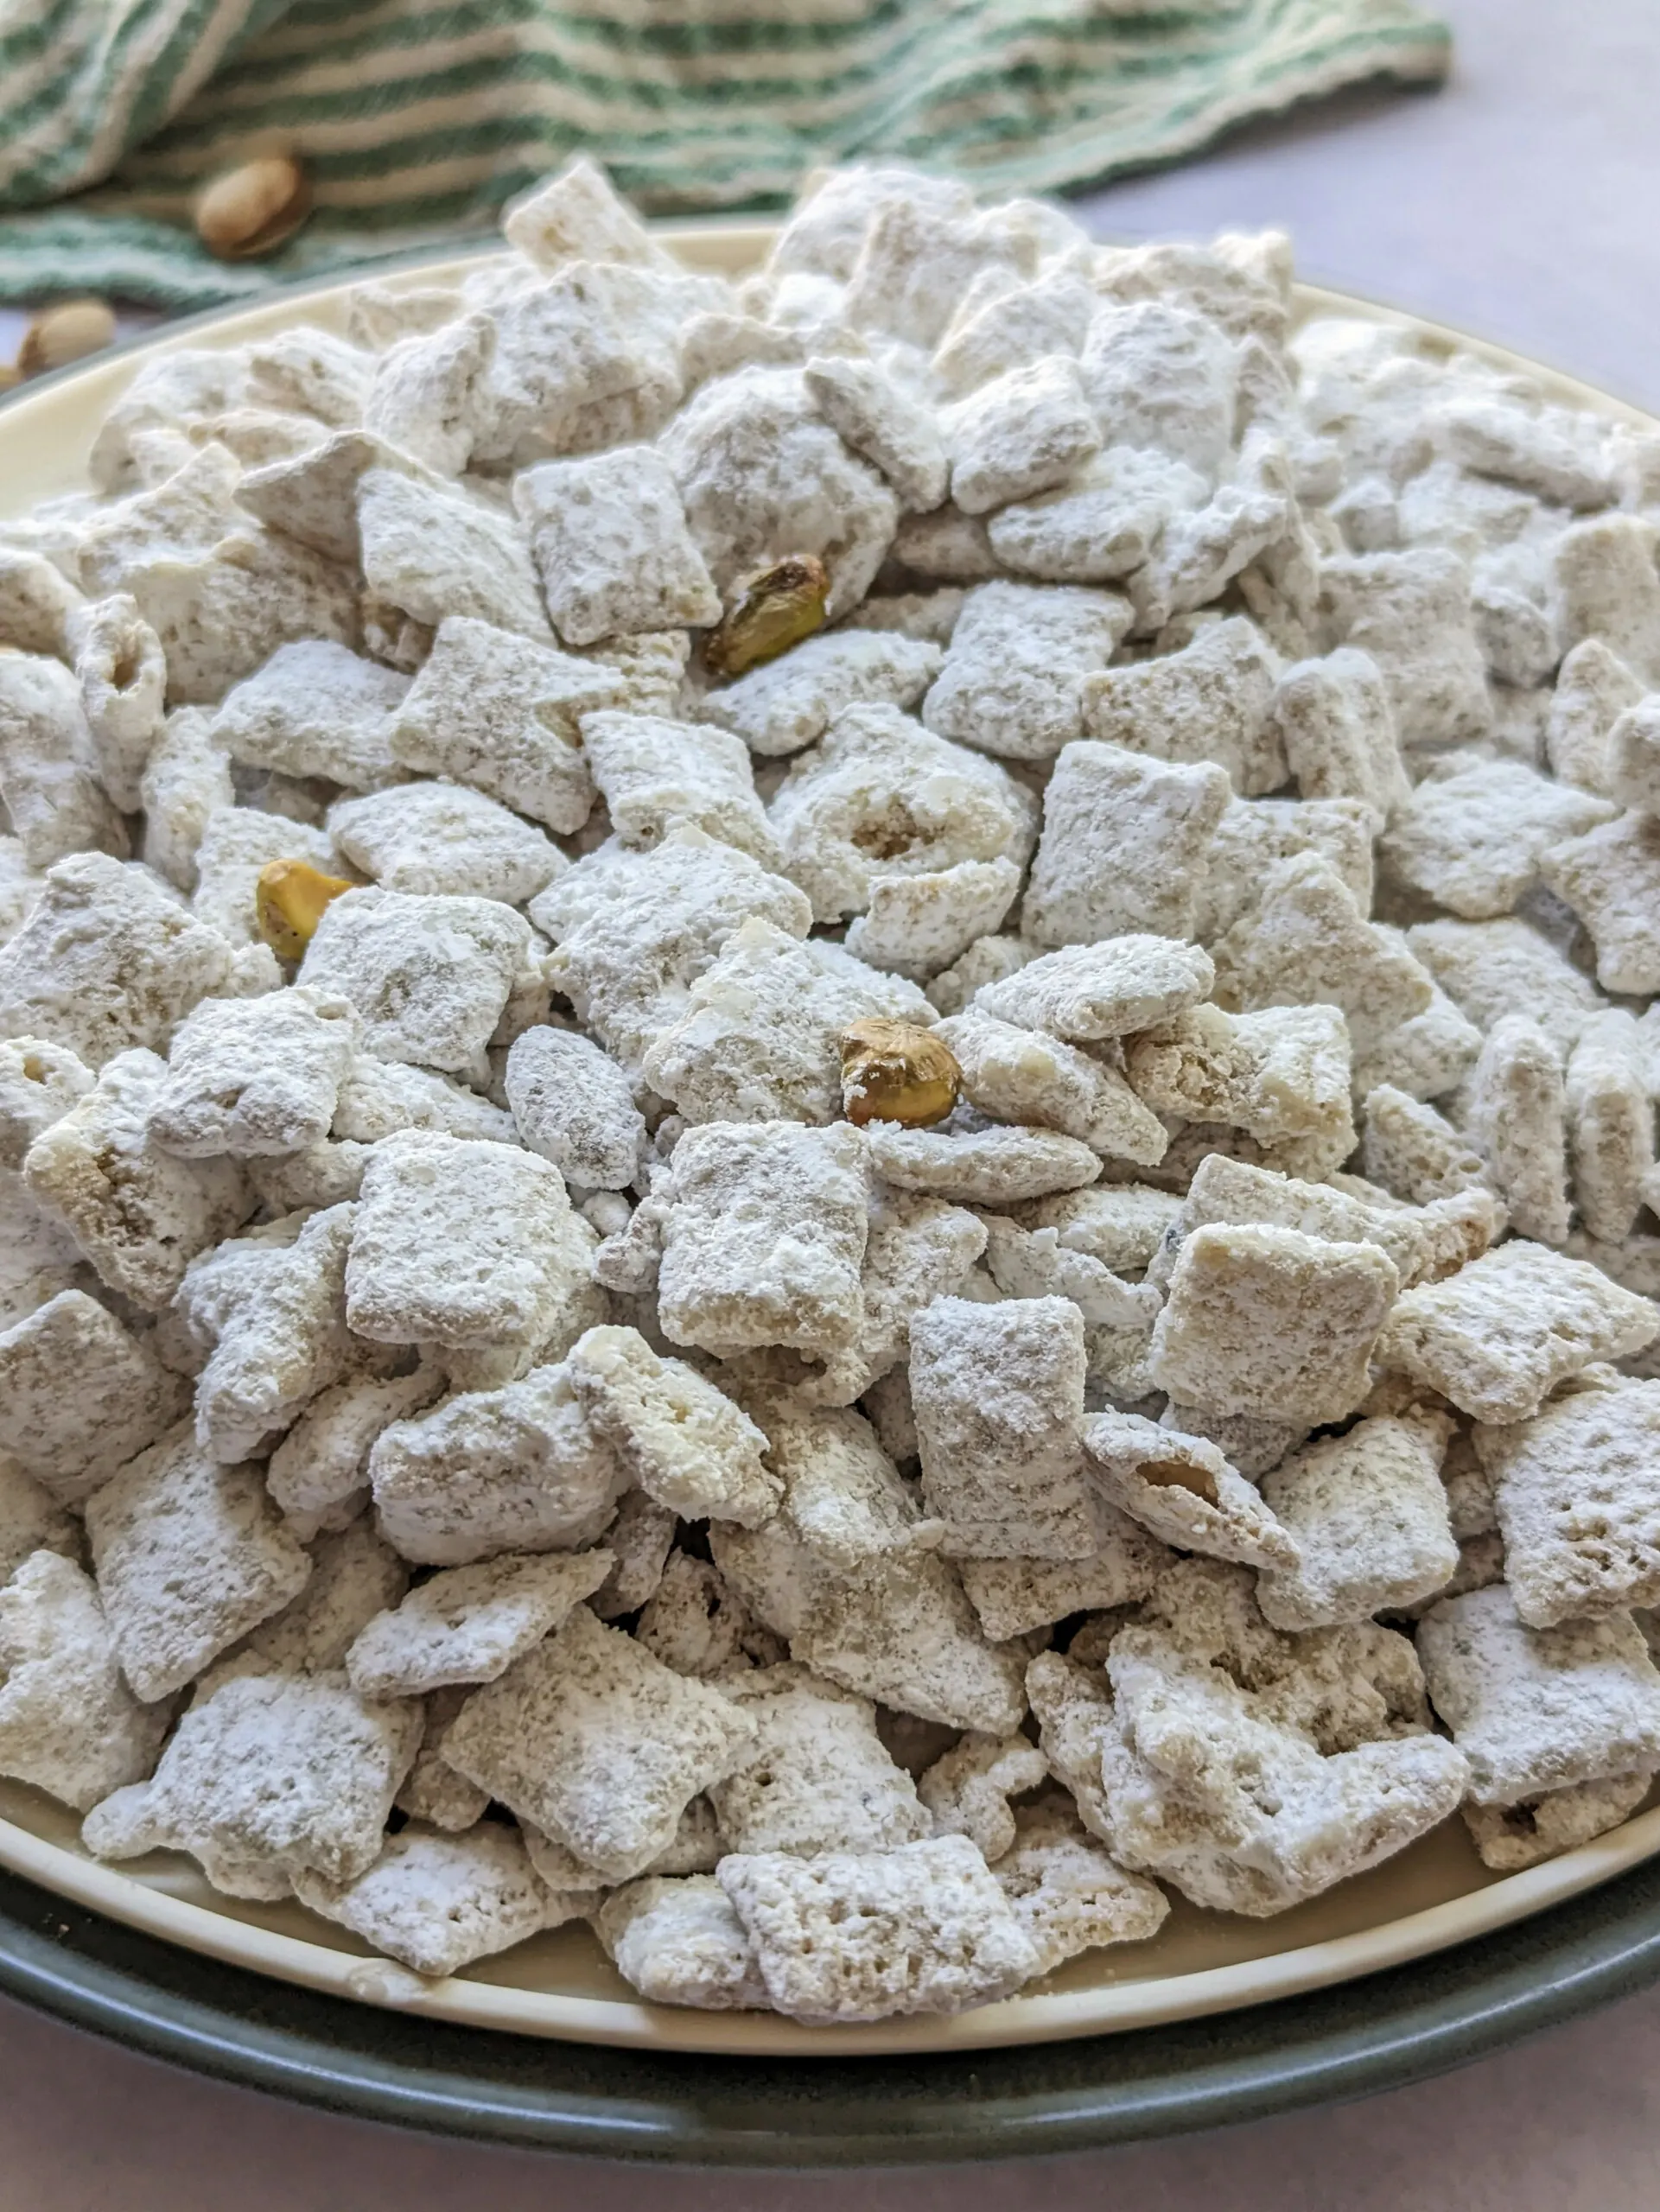 Pistachio puppy chow on a plate with pistachios in the background.